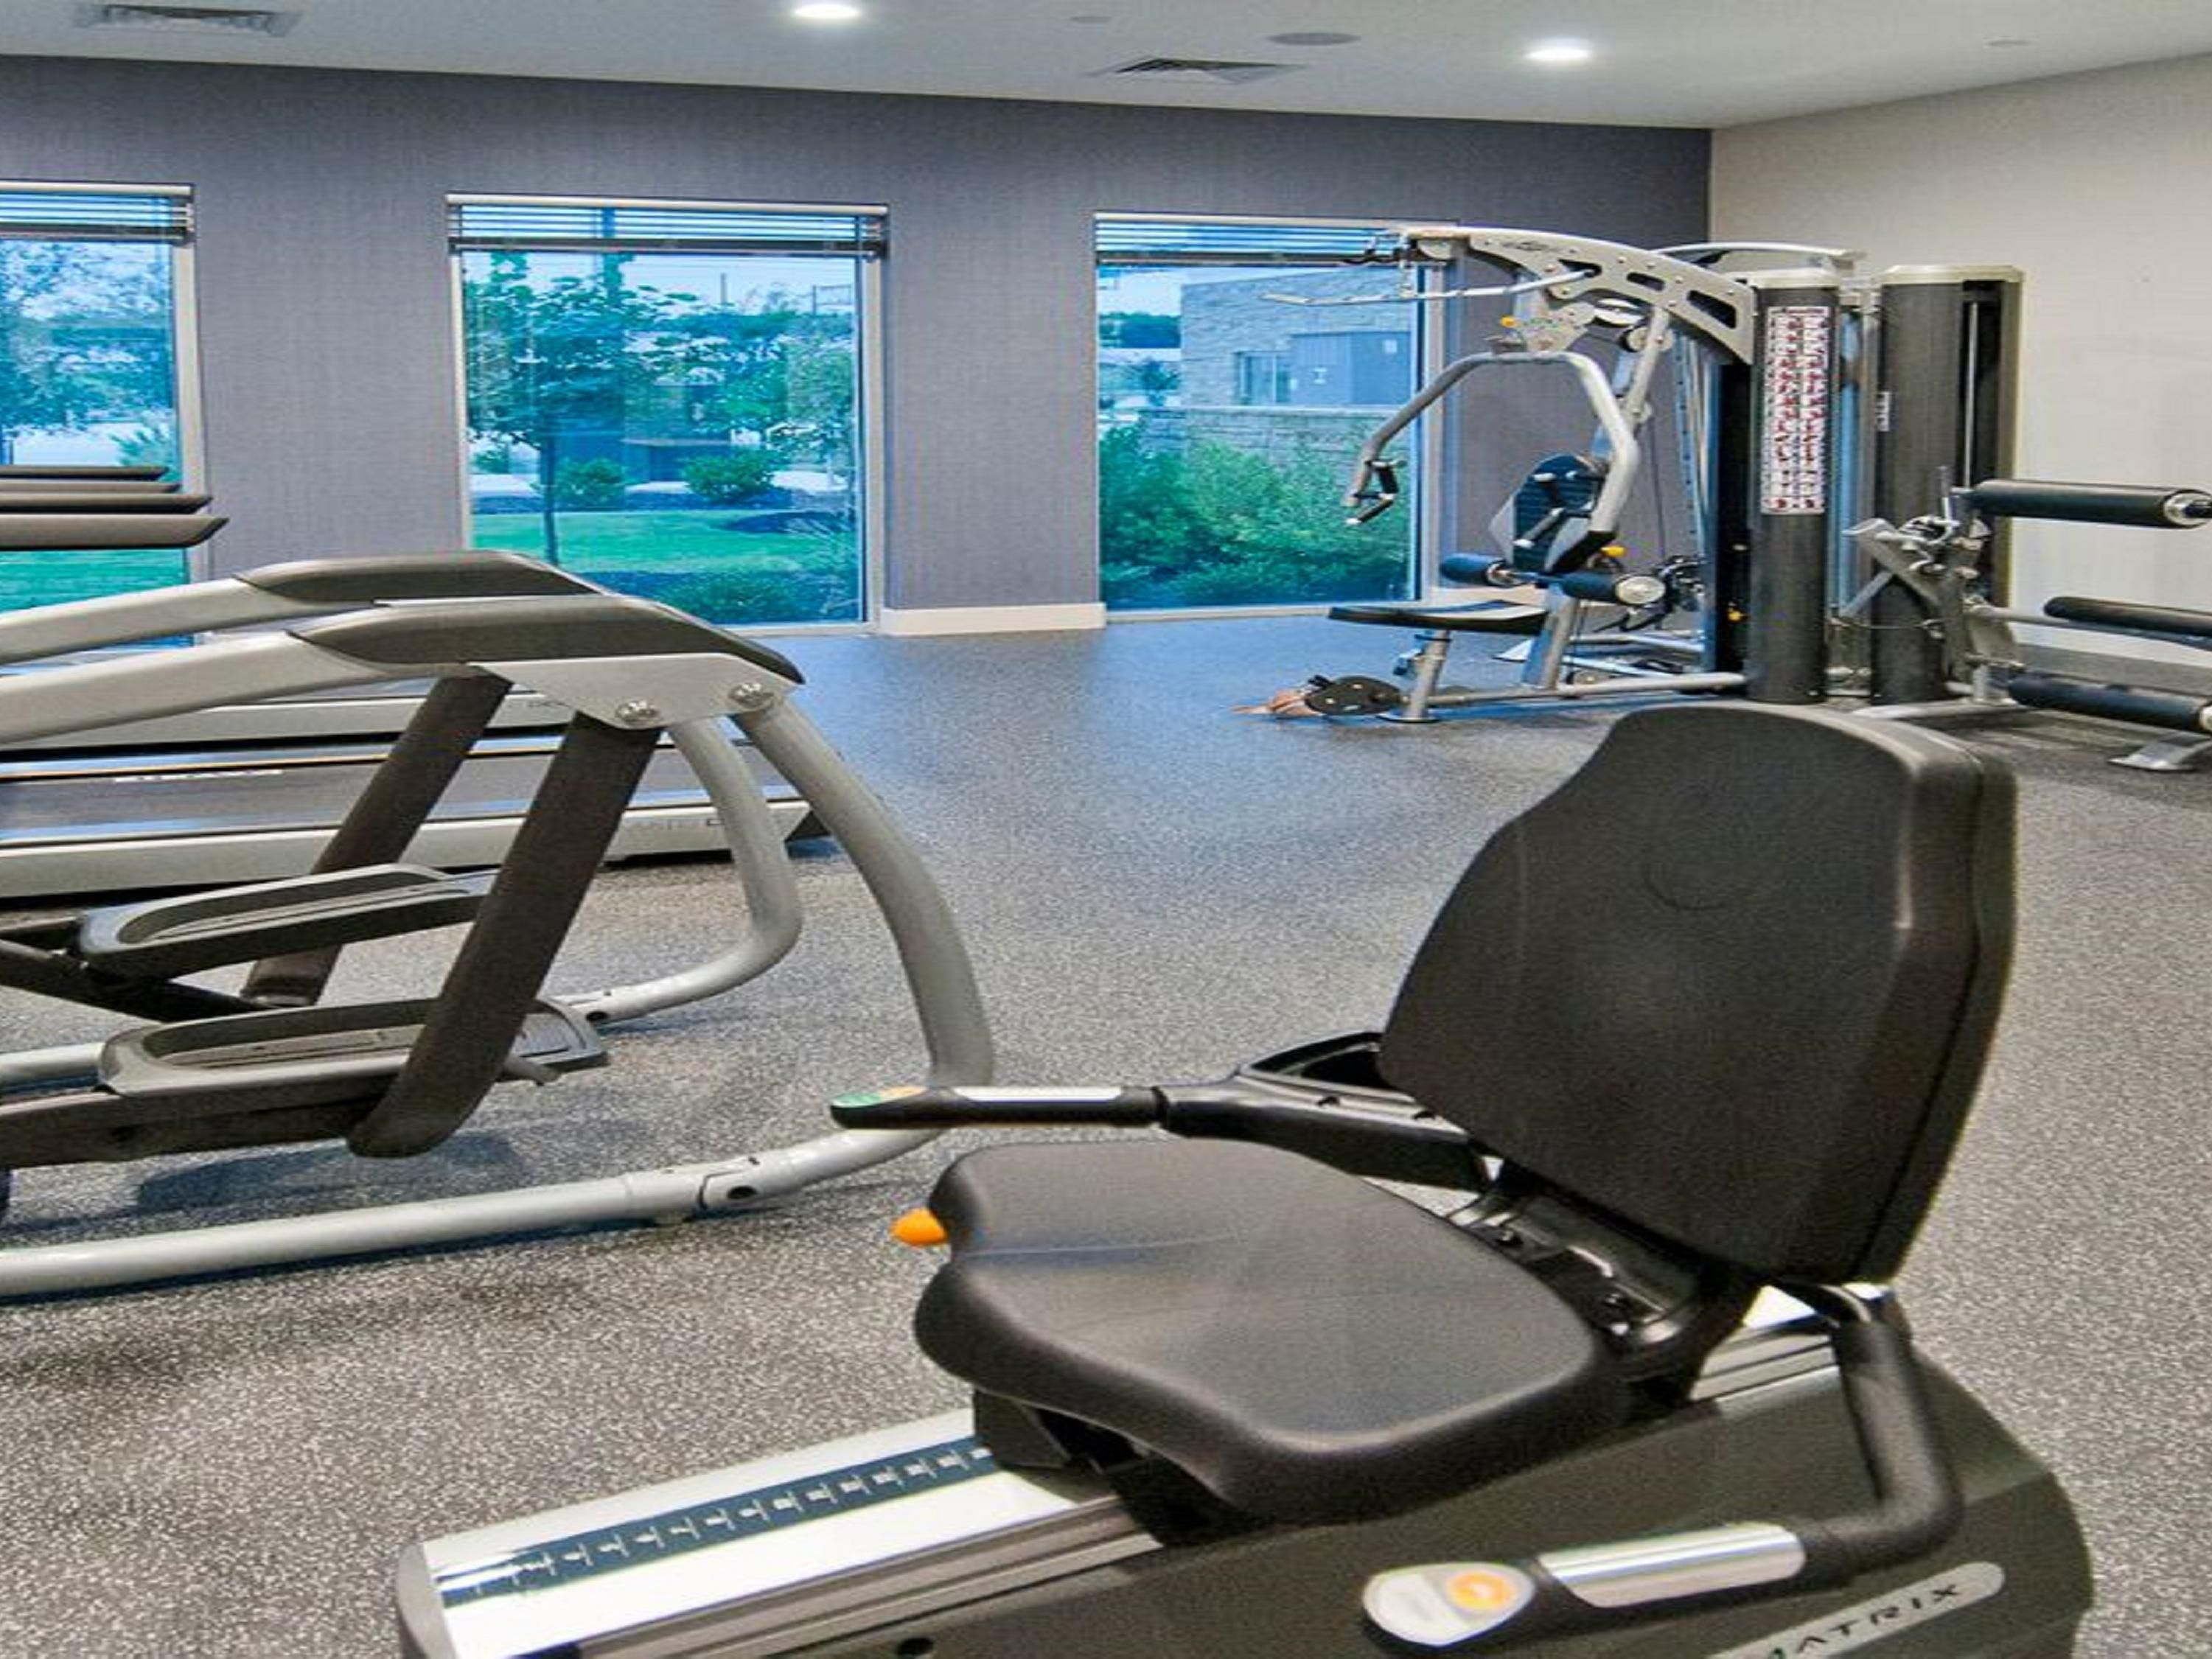 Stay fit even while on the road with our on-site state of the art 24 hour fitness center.
